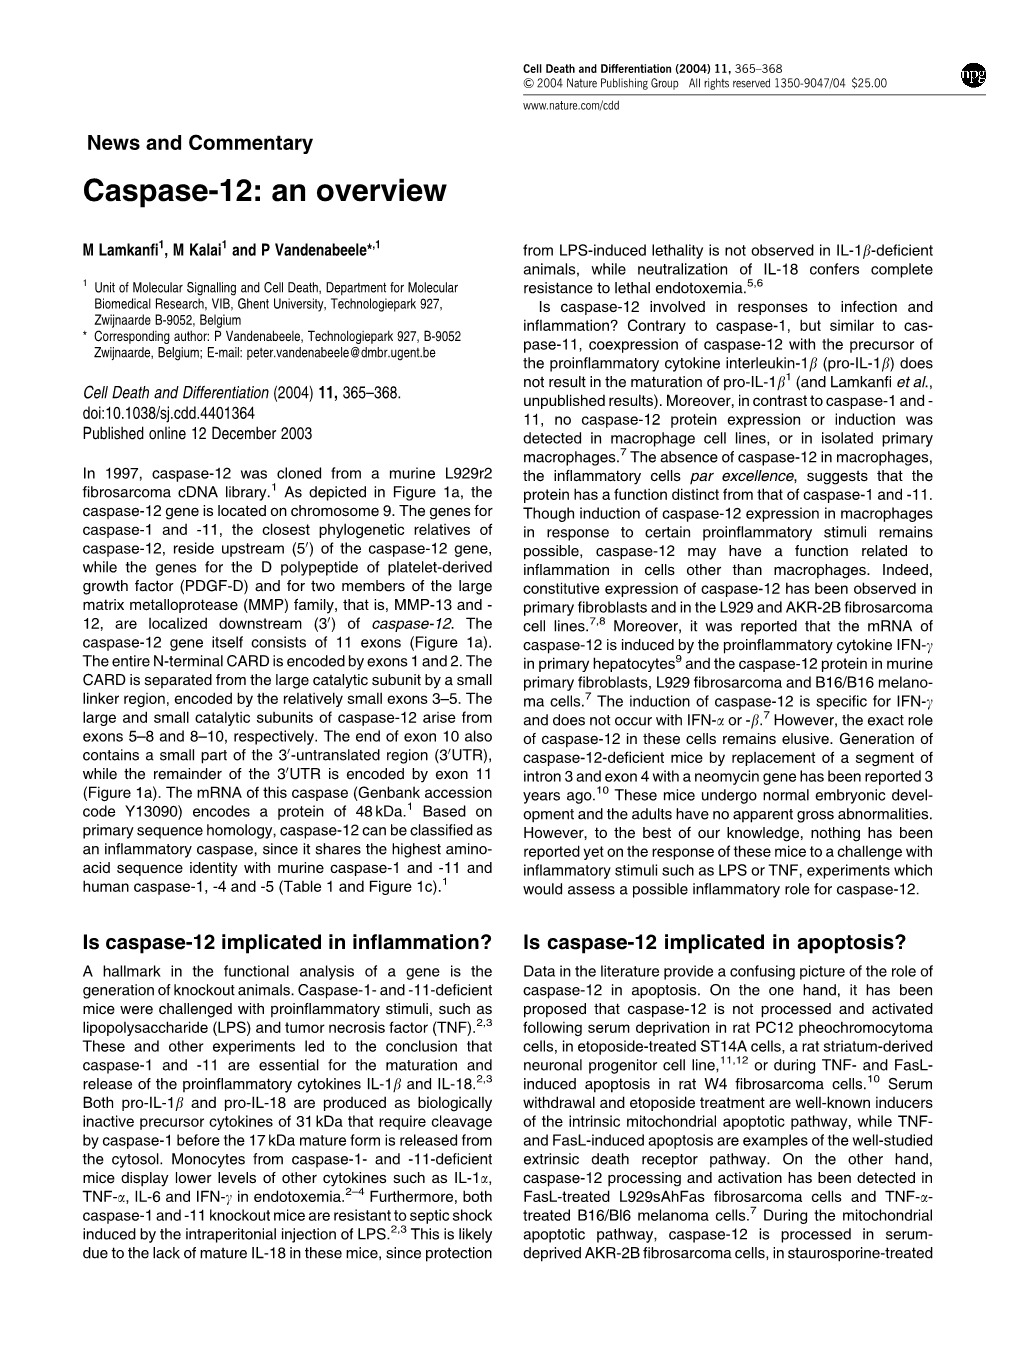 Caspase-12: an Overview